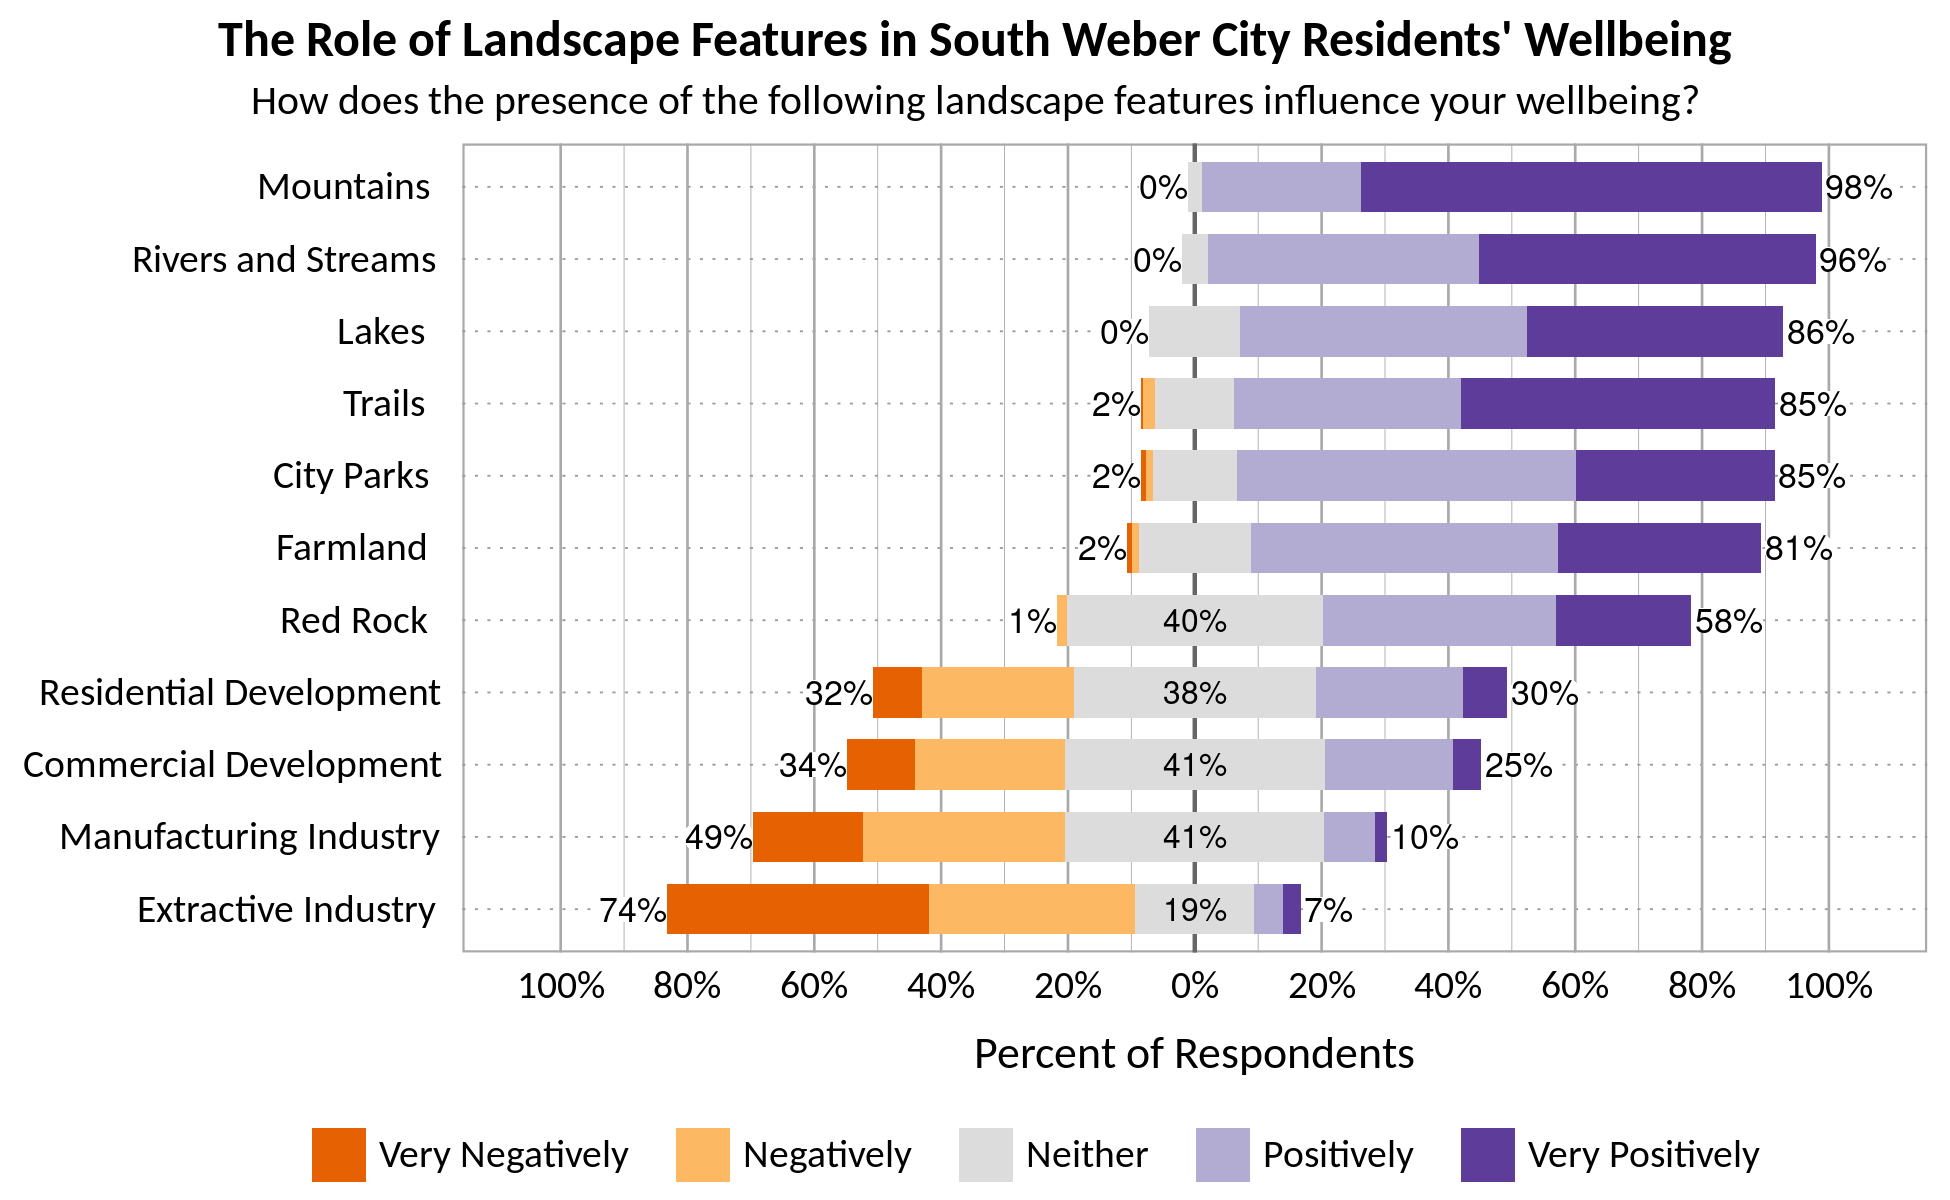 Likert Graph. Title: The Role of Landscape Features in South Weber Residents' Wellbeing. Subtitle: How does the presence of the following landscape features influence your wellbeing? Feature: Mountains - 0% of respondents indicated very negatively or negatively, 2% indicated neither, 98% indicated positively or very positively; Feature: Rivers and Streams - 0% of respondents indicated very negatively or negatively, 4% indicated neither, 96% indicated positively or very positively; Feature: Lakes - 0% of respondents indicated very negatively or negatively, 14% indicated neither, 86% indicated positively or very positively; Feature: Trails - 2% of respondents indicated very negatively or negatively, 13% indicated neither, 85% indicated positively or very positively; Feature: Red Rock - 1% of respondents indicated very negatively or negatively, 40% indicated neither, 58% indicated positively or very positively; Feature: City Parks - 2% of respondents indicated very negatively or negatively, 13% indicated neither, 85% indicated positively or very positively; Feature: Farmland - 2% of respondents indicated very negatively or negatively, 17% indicated neither, 81% indicated positively or very positively; Feature: Residential Development - 32% of respondents indicated very negatively or negatively, 38% indicated neither, 30% indicated positively or very positively; Feature: Commercial Development - 34% of respondents indicated very negatively or negatively, 41% indicated neither, 25% indicated positively or very positively; Feature: Extractive Industry - 74% of respondents indicated very negatively or negatively, 19% indicated neither, 7% indicated positively or very positively; Feature: Manufacturing Industry - 49% of respondents indicated very negatively or negatively, 41% indicated neither, 10% indicated positively or very positively.